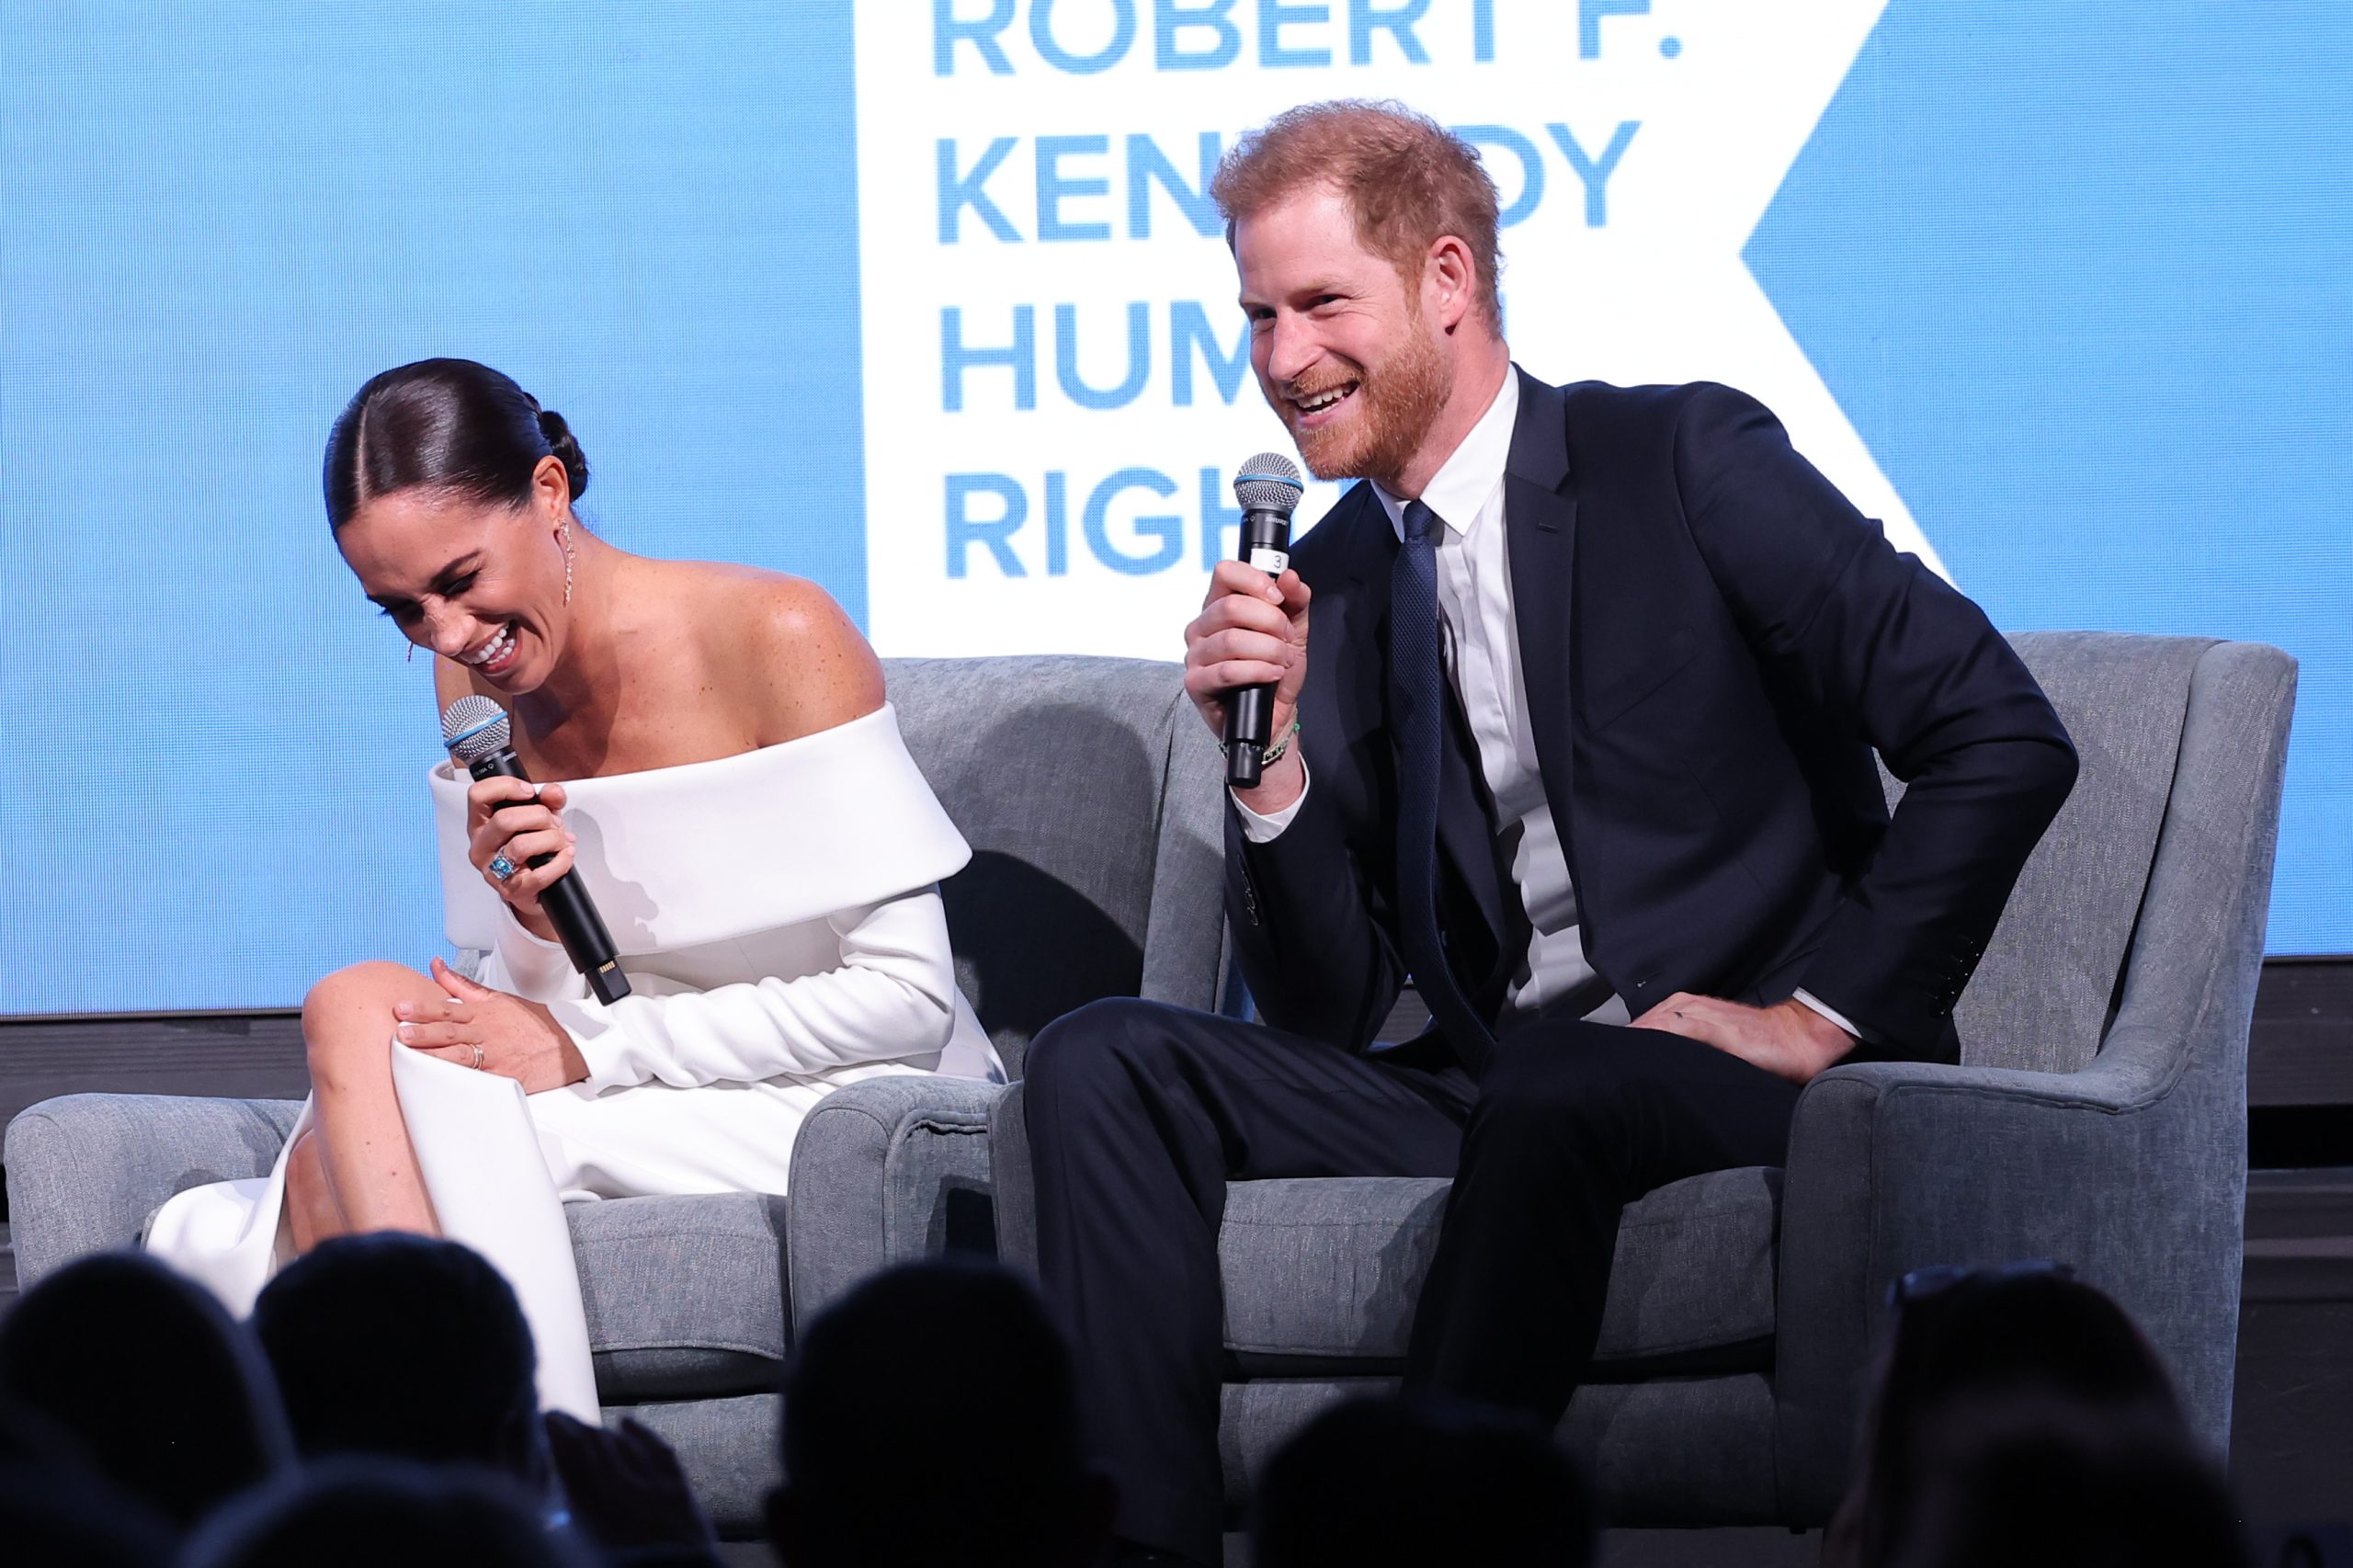  Meghan Markle and Prince Harry at the 2022 Robert F. Kennedy Human Rights Ripple of Hope Gala